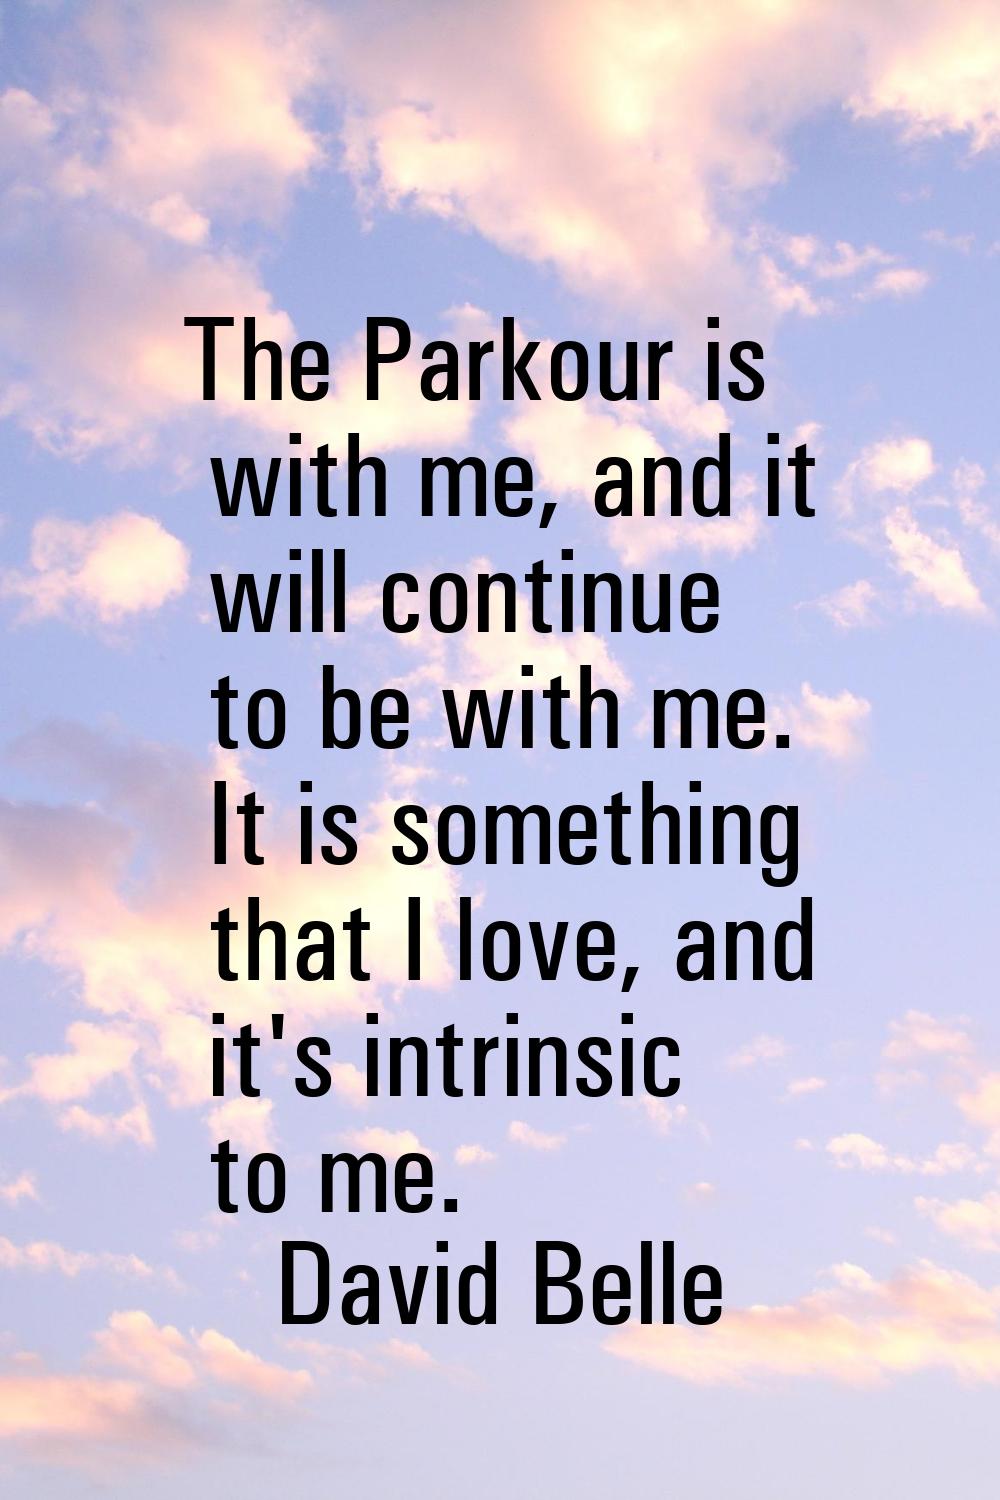 The Parkour is with me, and it will continue to be with me. It is something that I love, and it's i